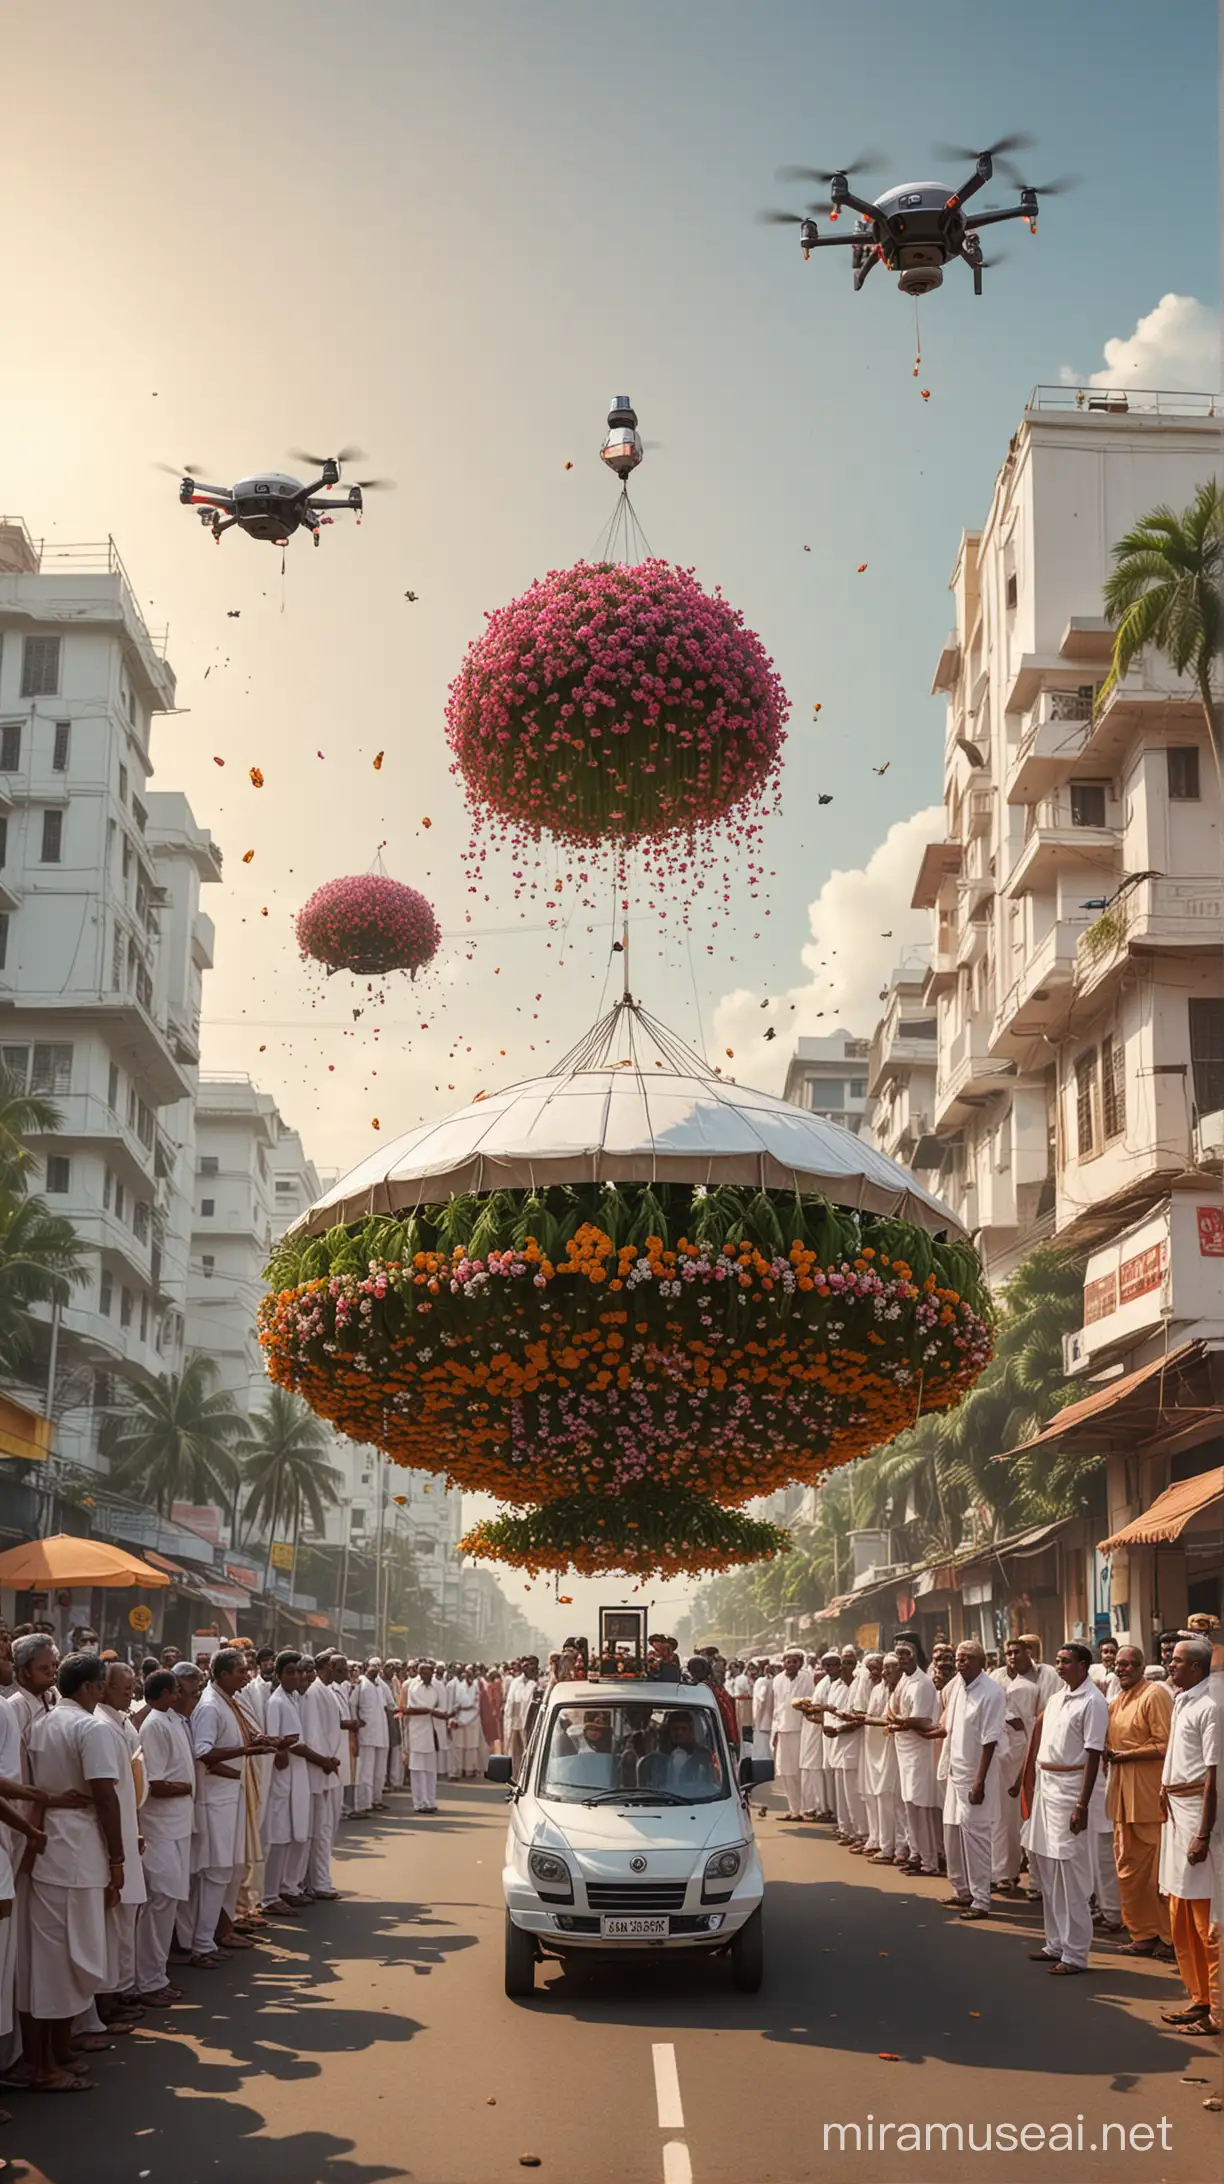 Futuristic Food Pod in Kerala with Drone Delivery and Holographic Display